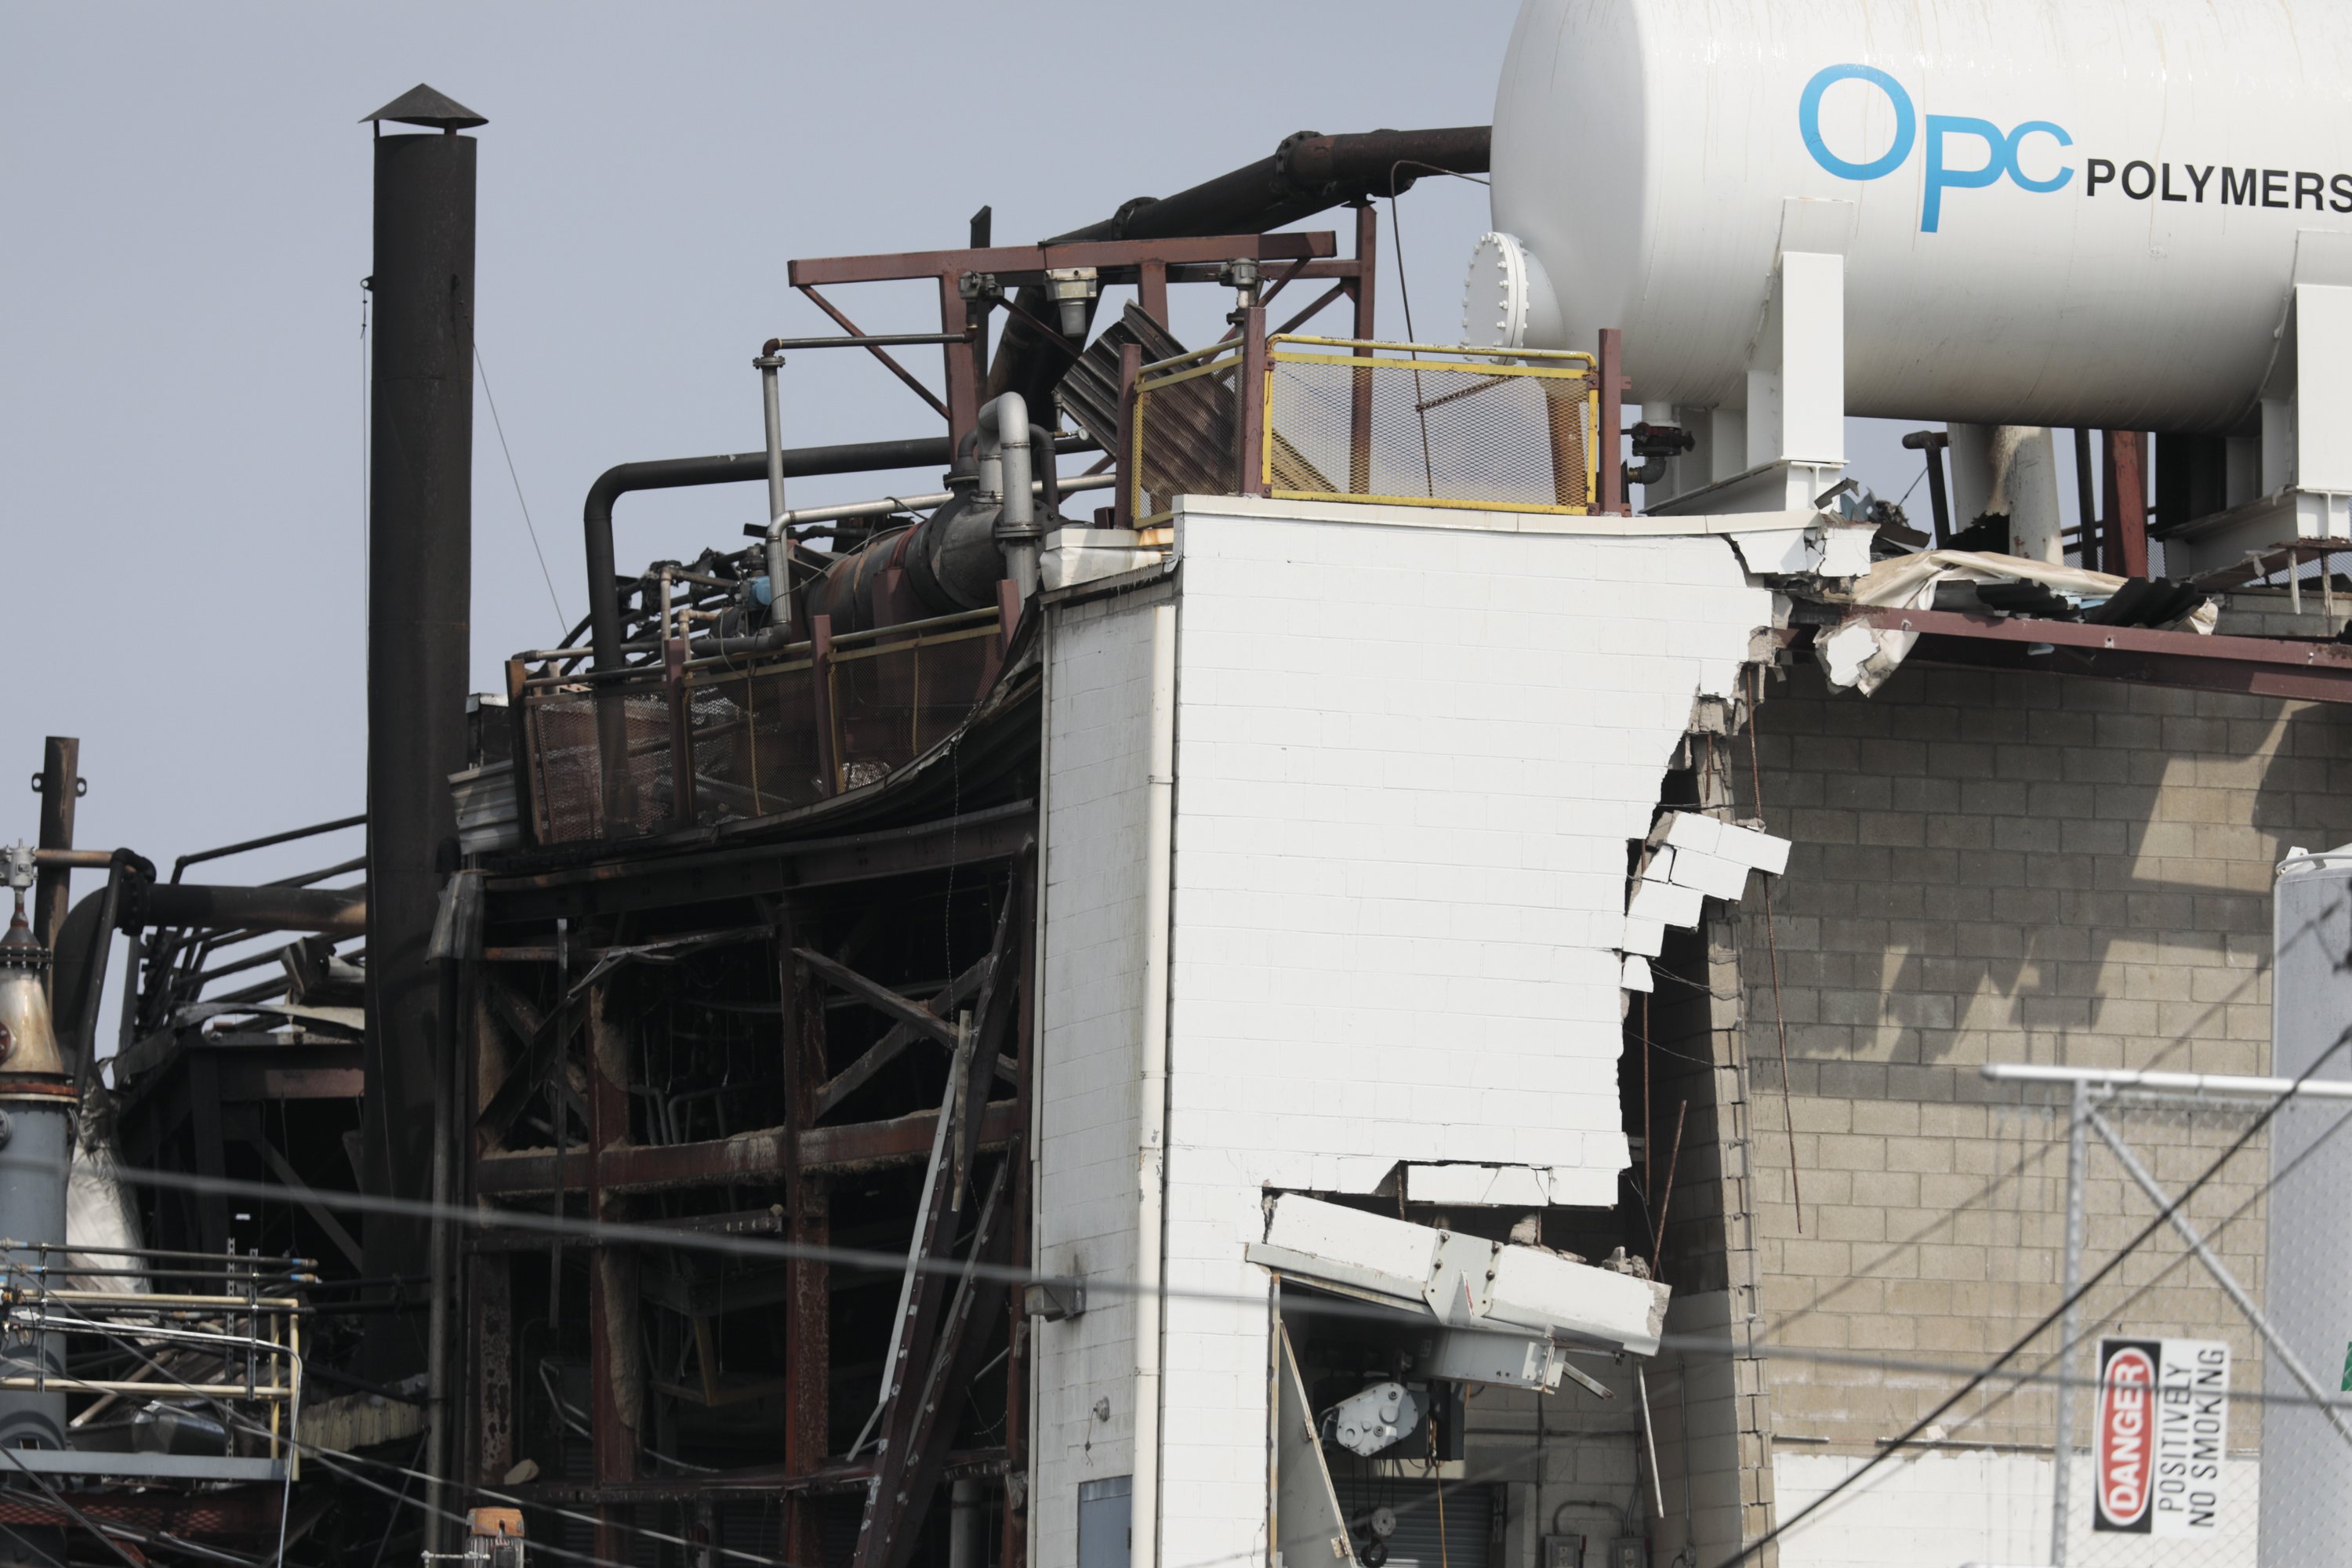 Paint plant explosion and fire kill 1, hurt 8; cause unclear AP News